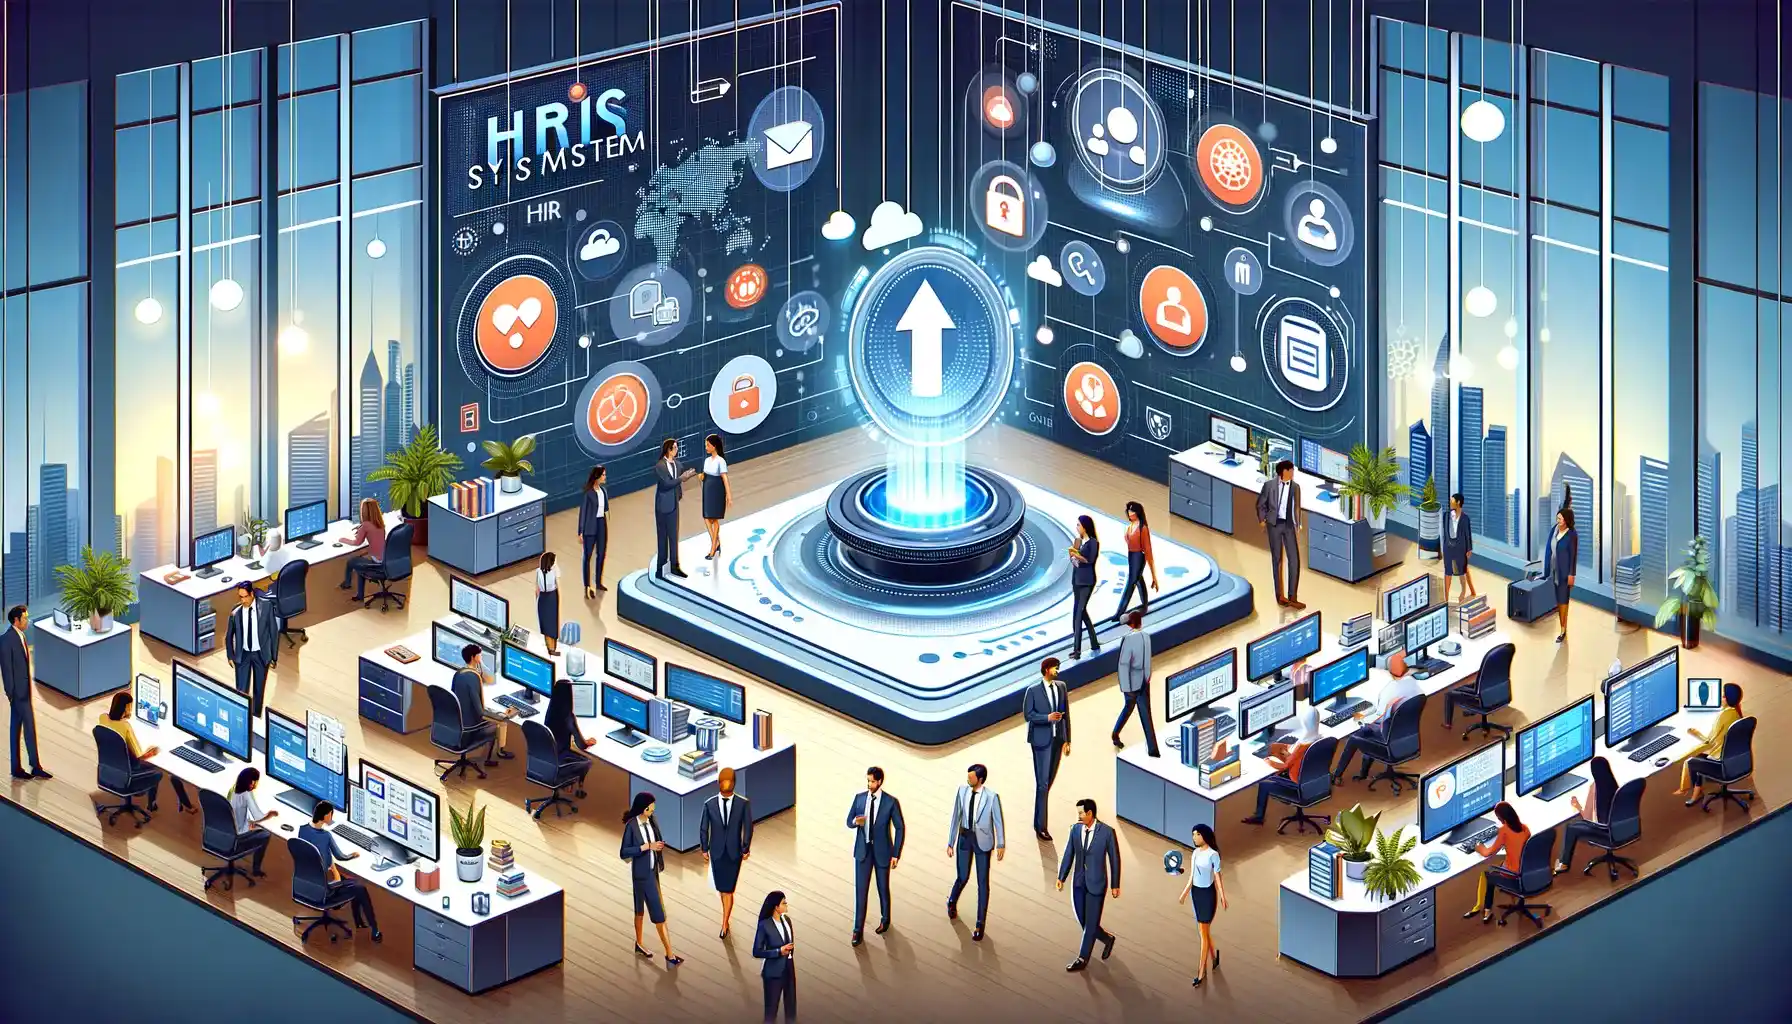 HRIS Systems for Small Businesses